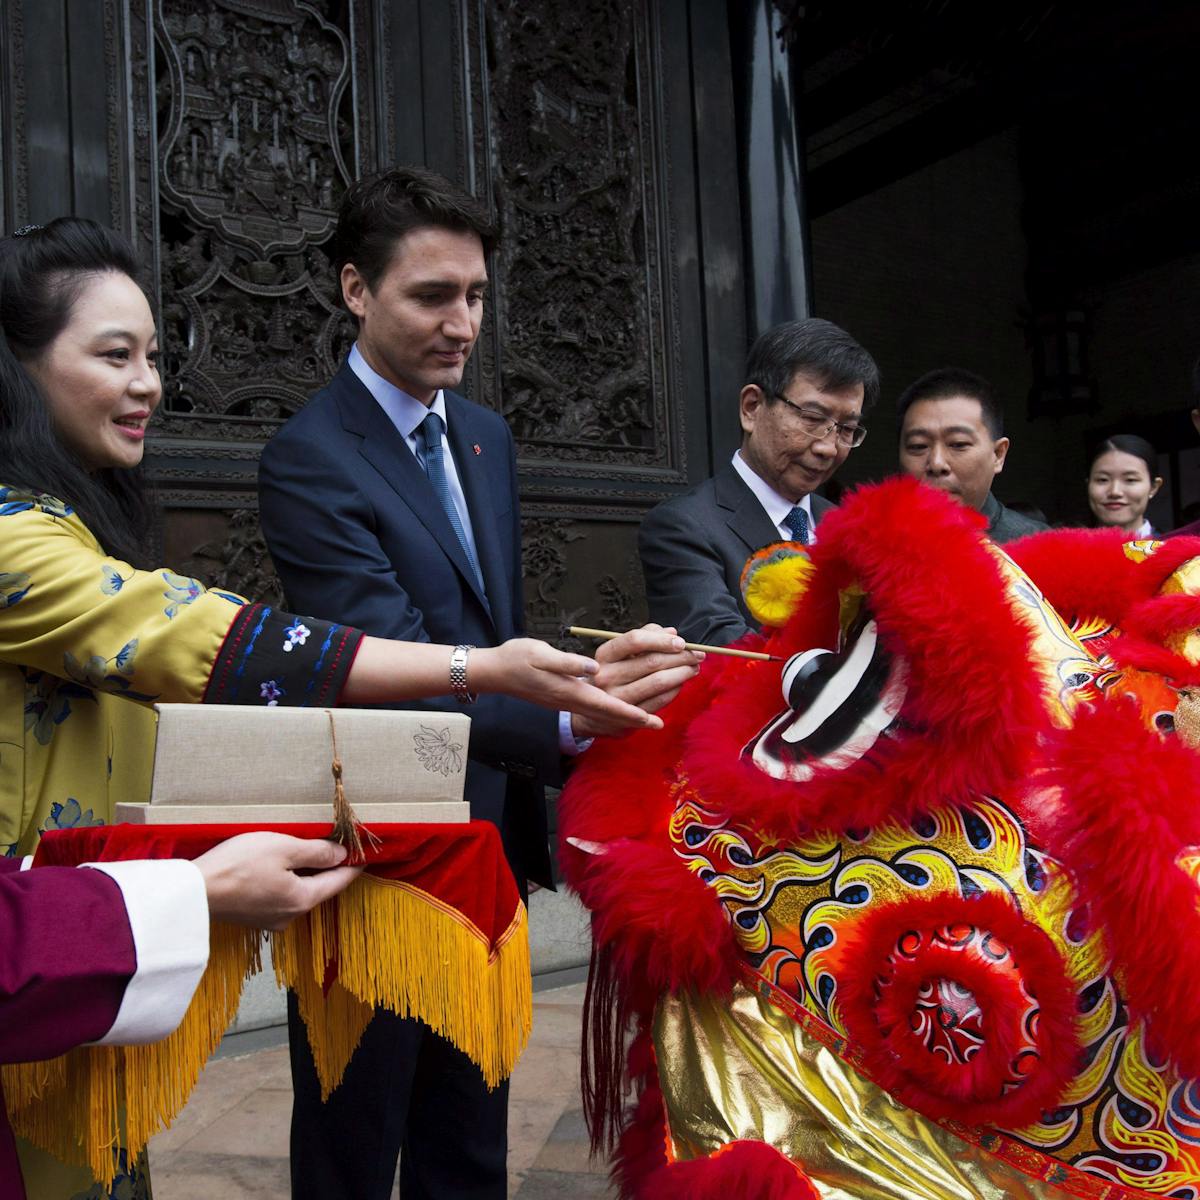 Canada-China trade deal: Is Ottawa selling out our democratic values?